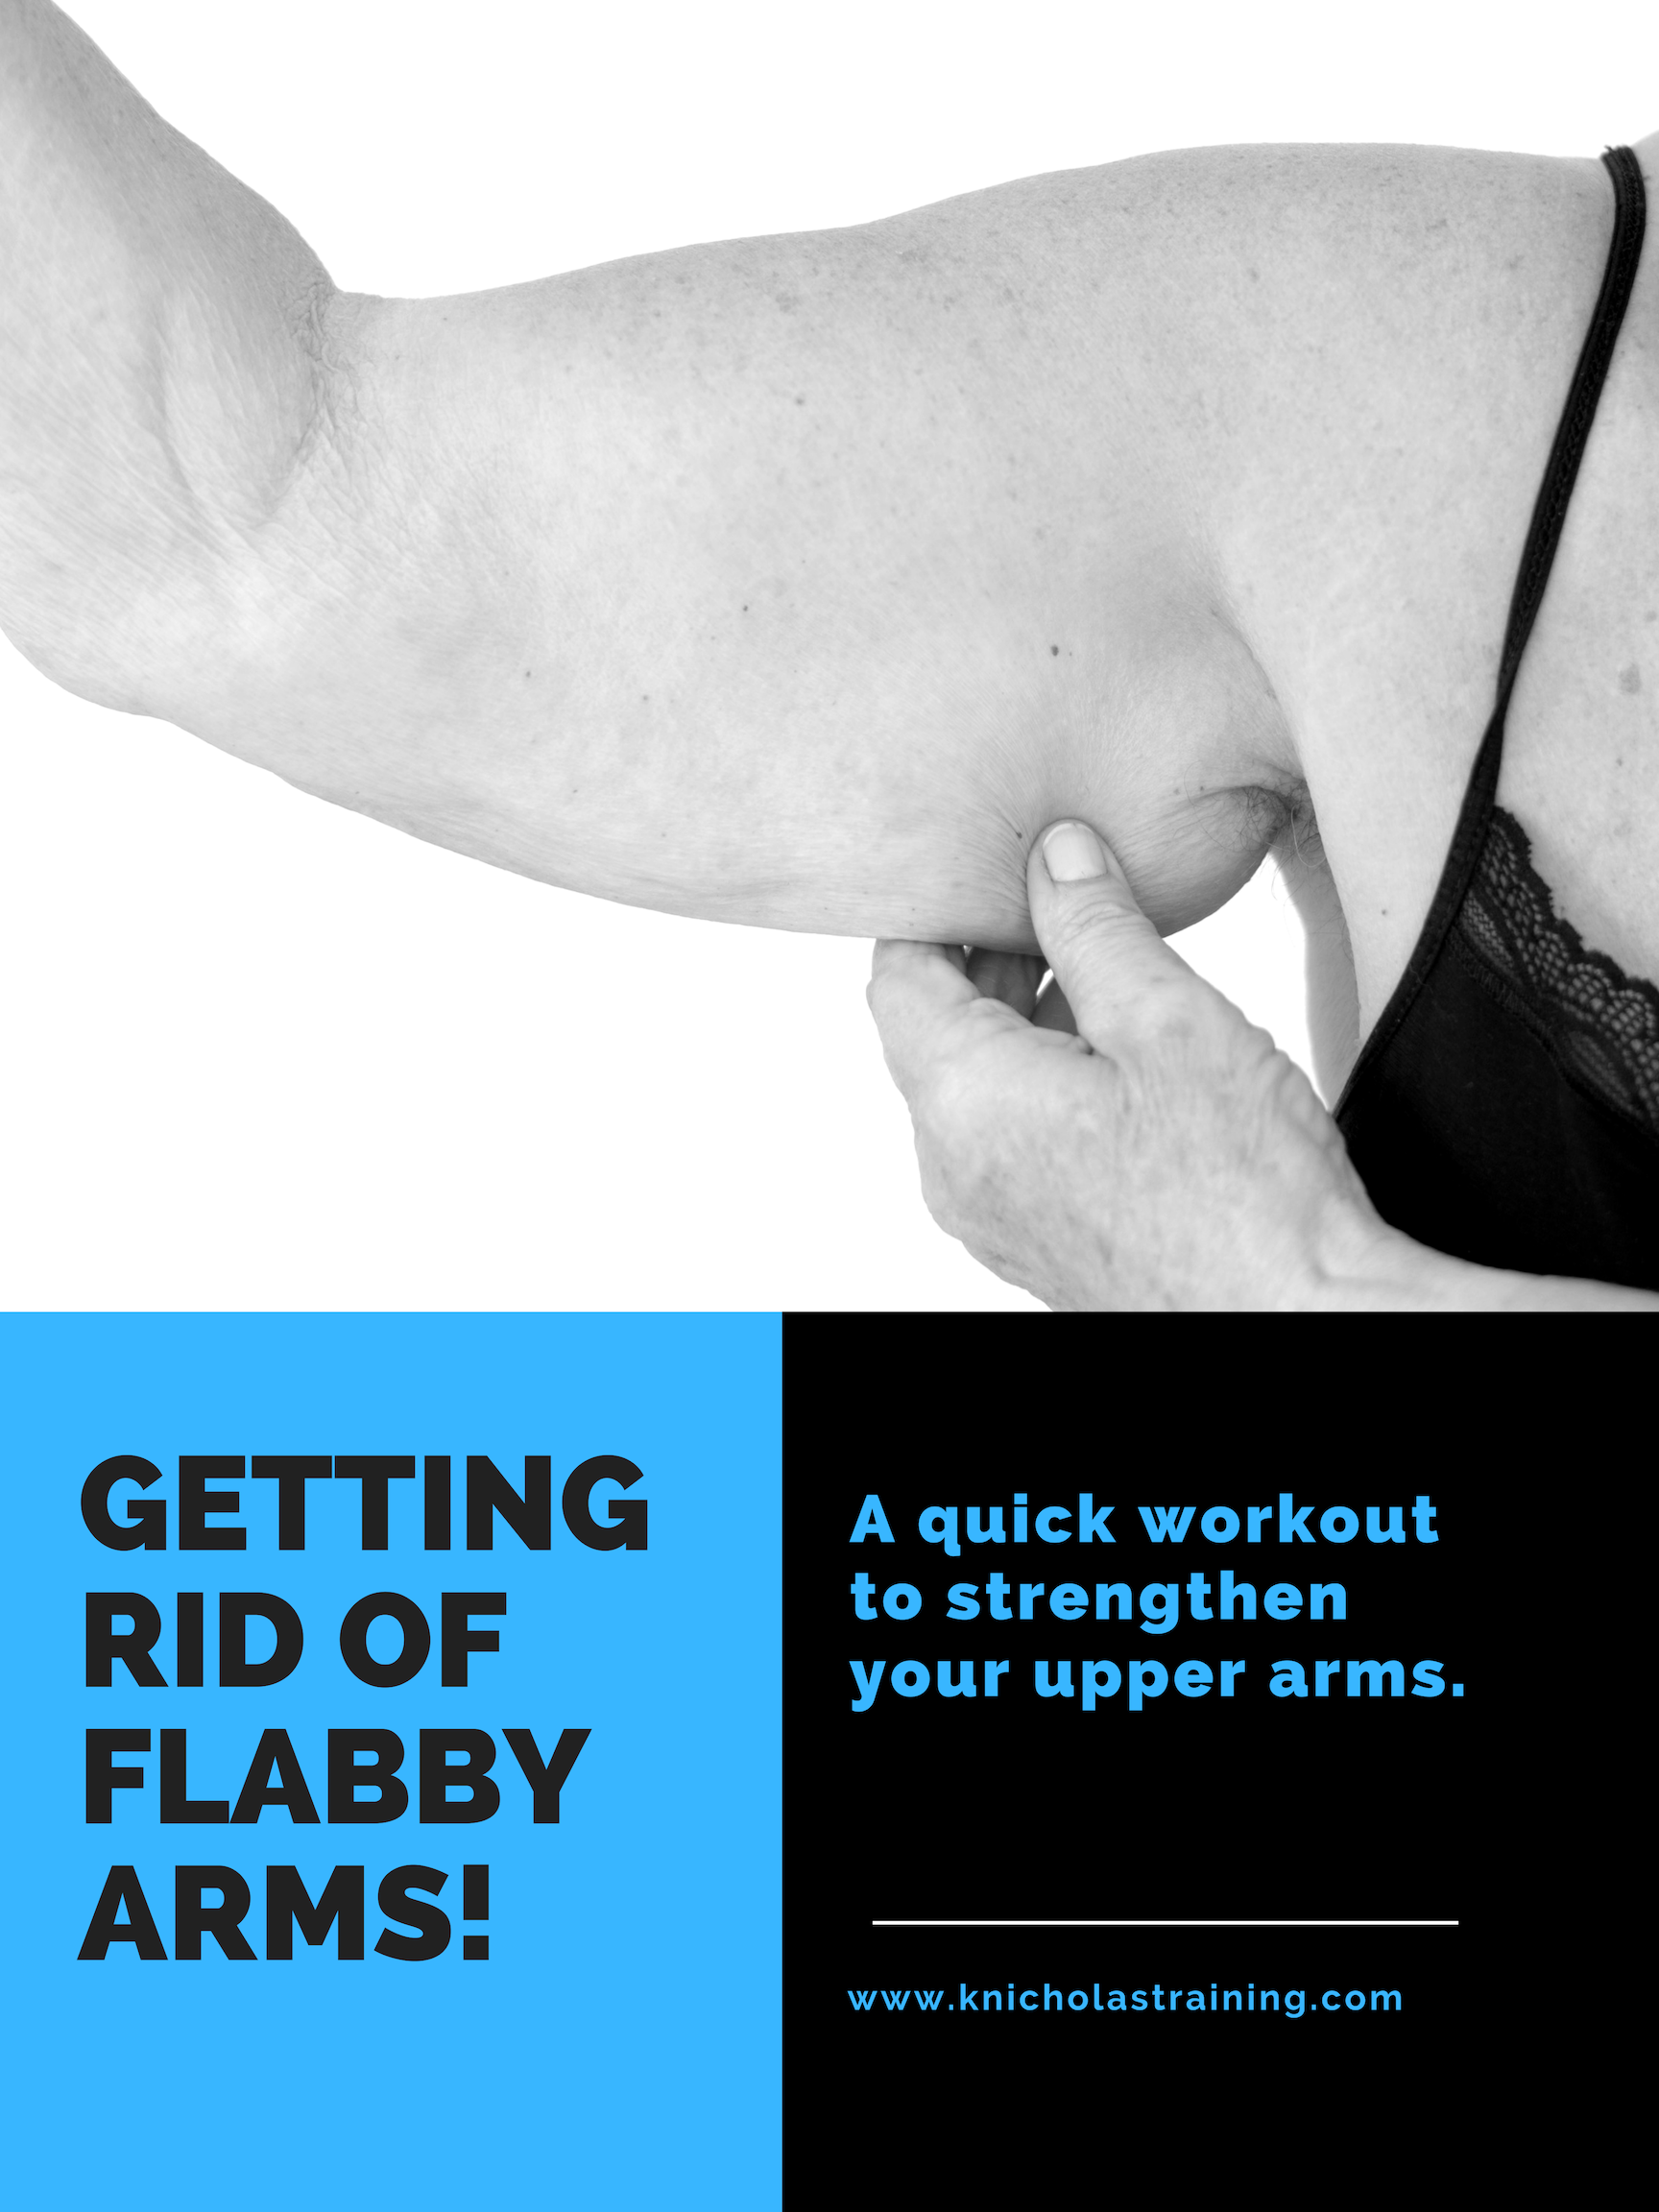 Getting Rid of Flabby Arms